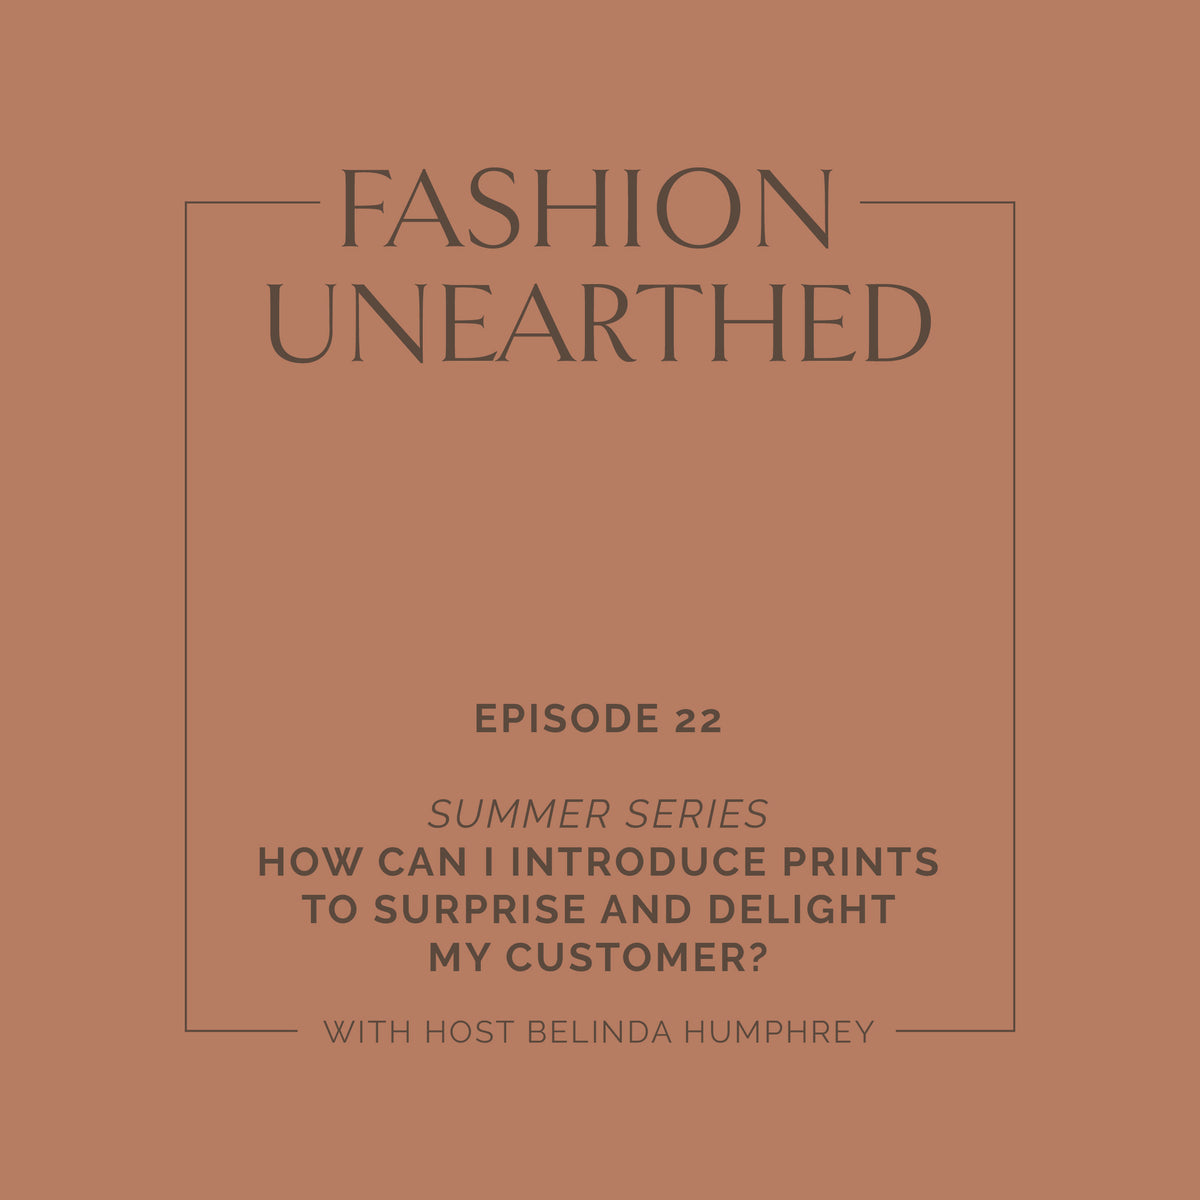 Episode 22: How can I introduce prints to surprise and delight my customer?